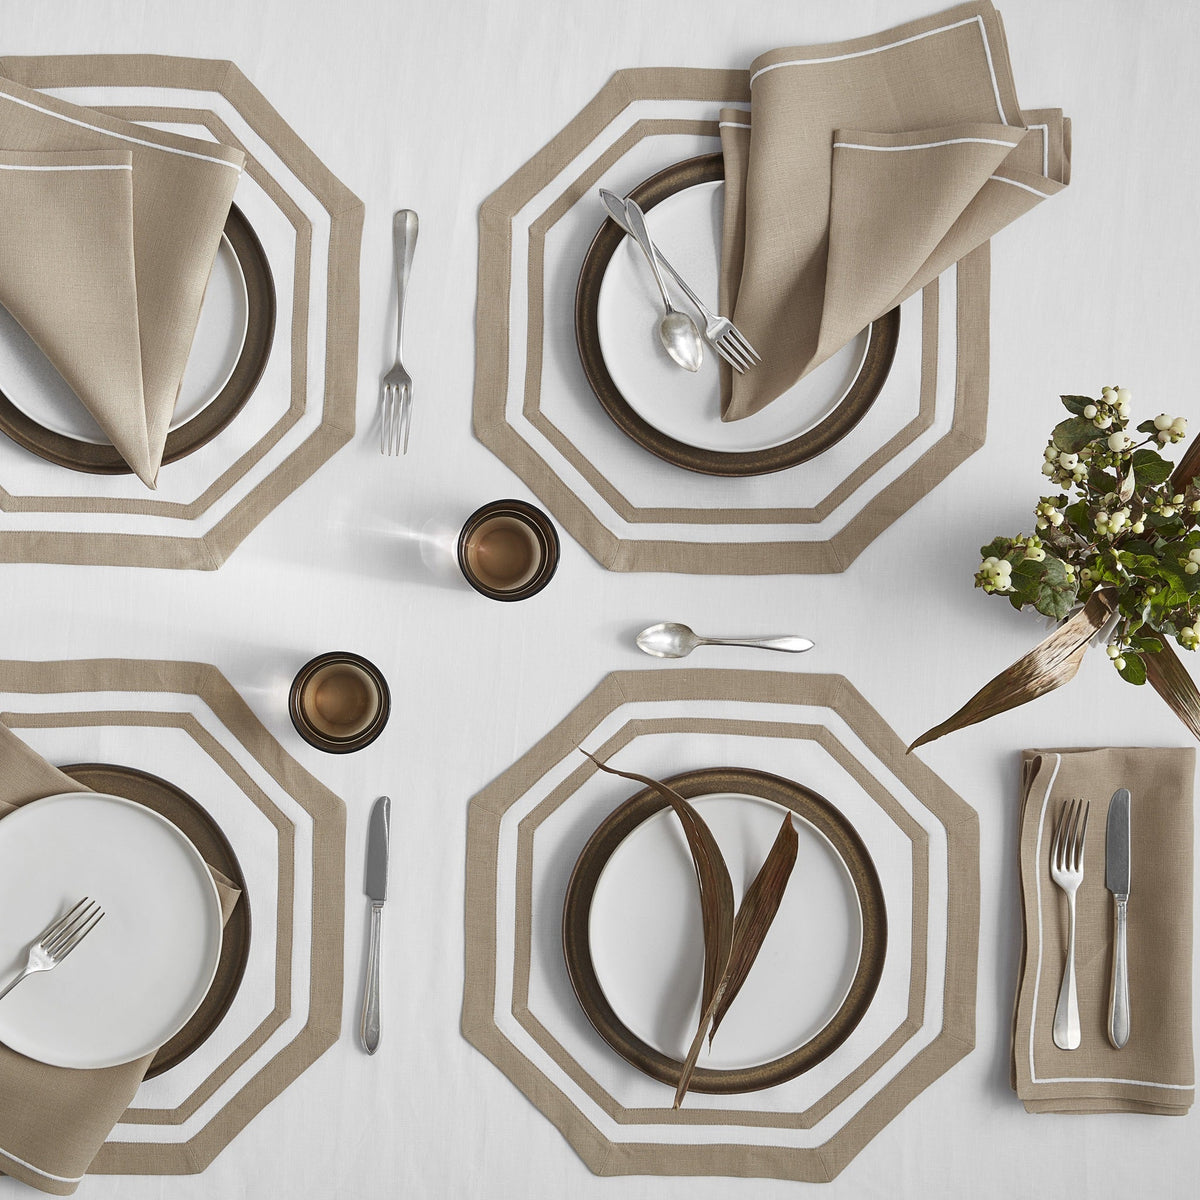 Matouk  Satin Stitch Napkins on a Table with Matouk Double Border Octagon Placemats in Oat Color